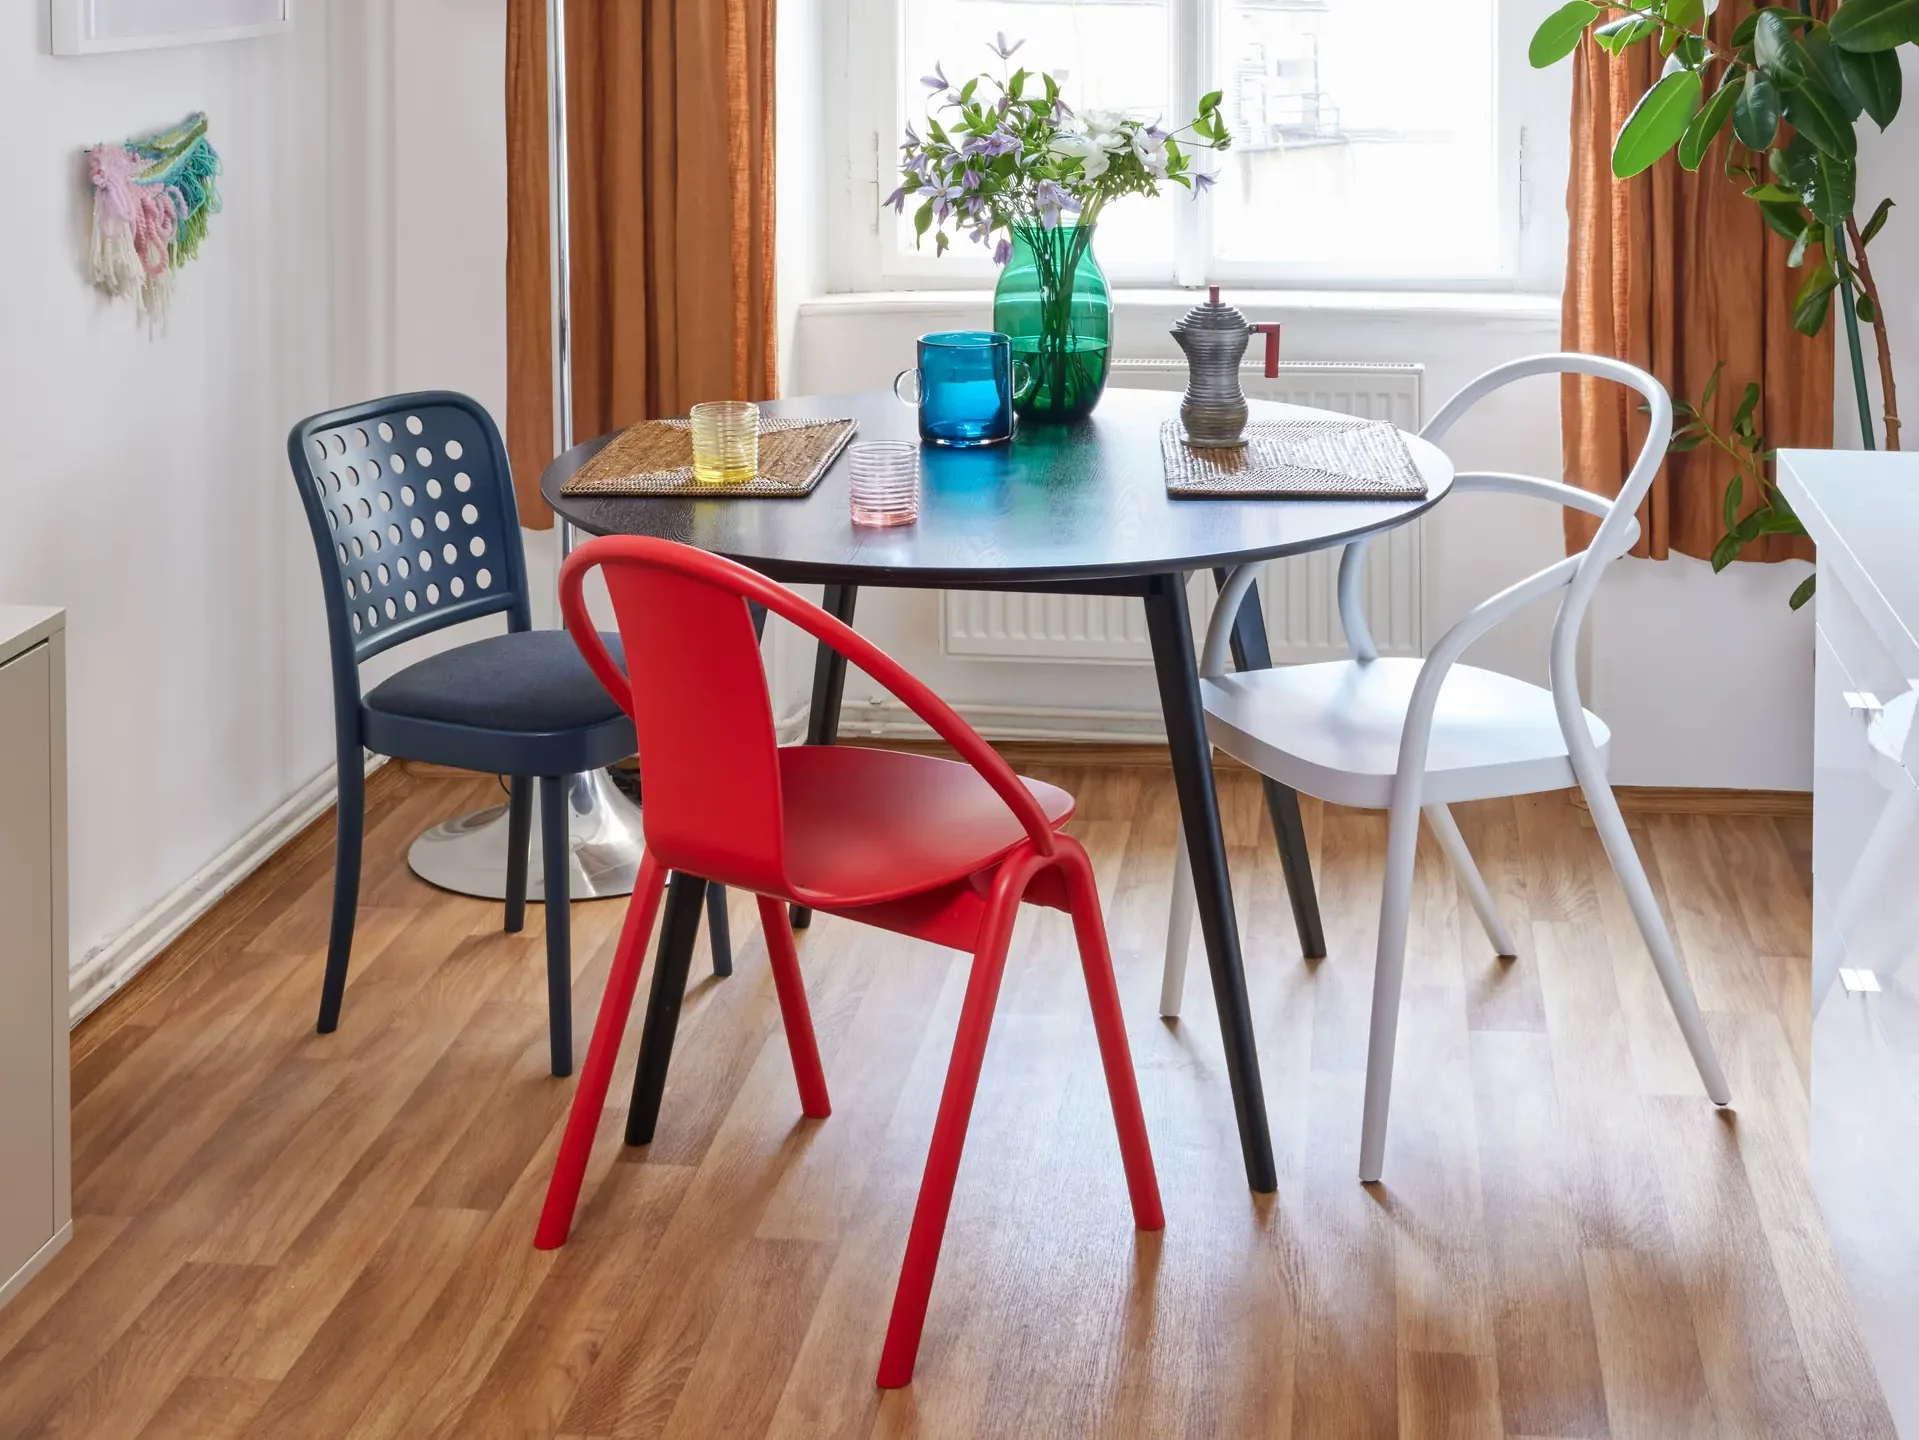 Dining setting with a round table & different colour chairs.